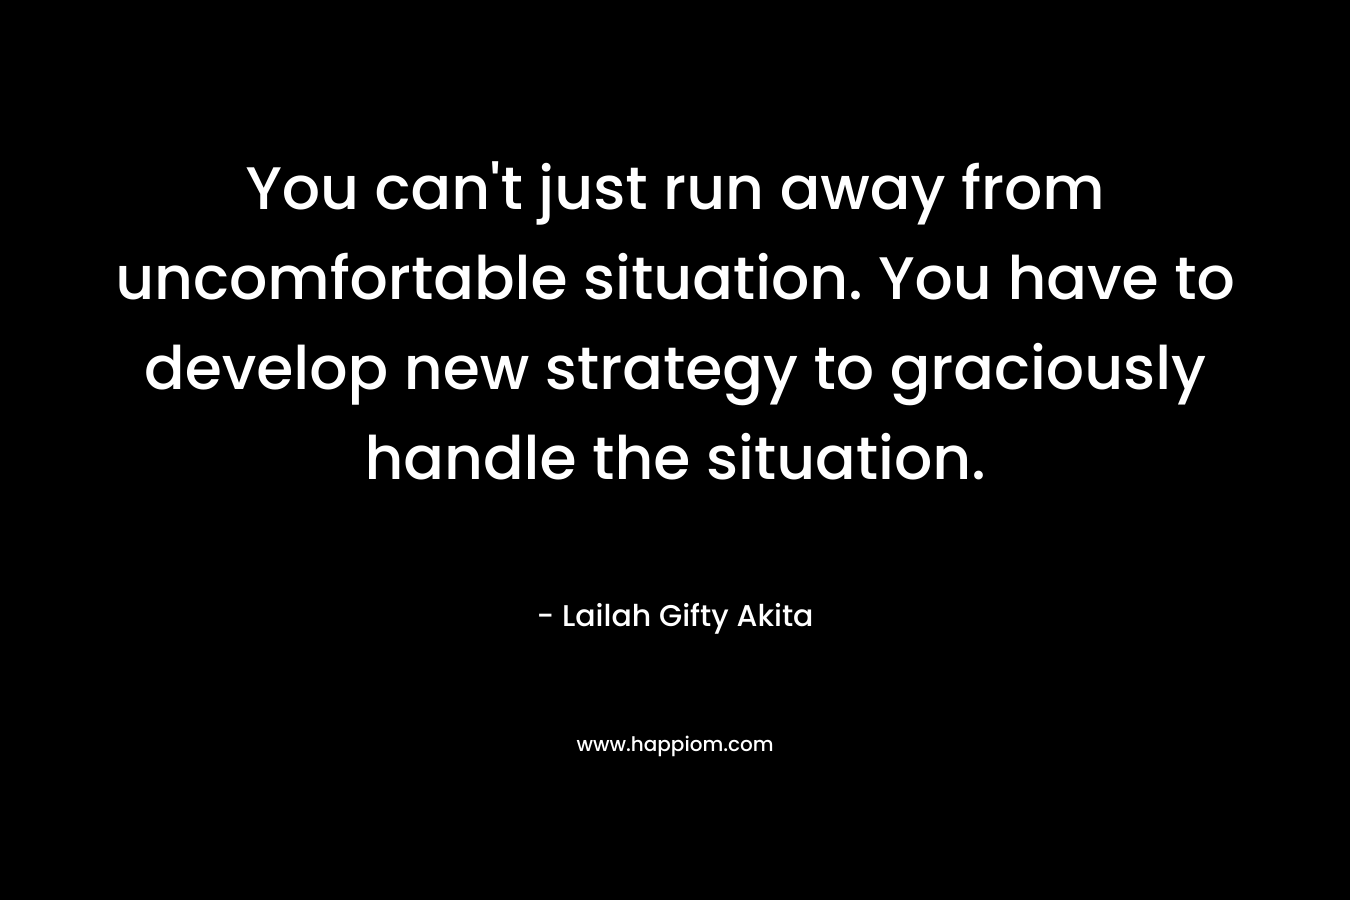 You can't just run away from uncomfortable situation. You have to develop new strategy to graciously handle the situation.